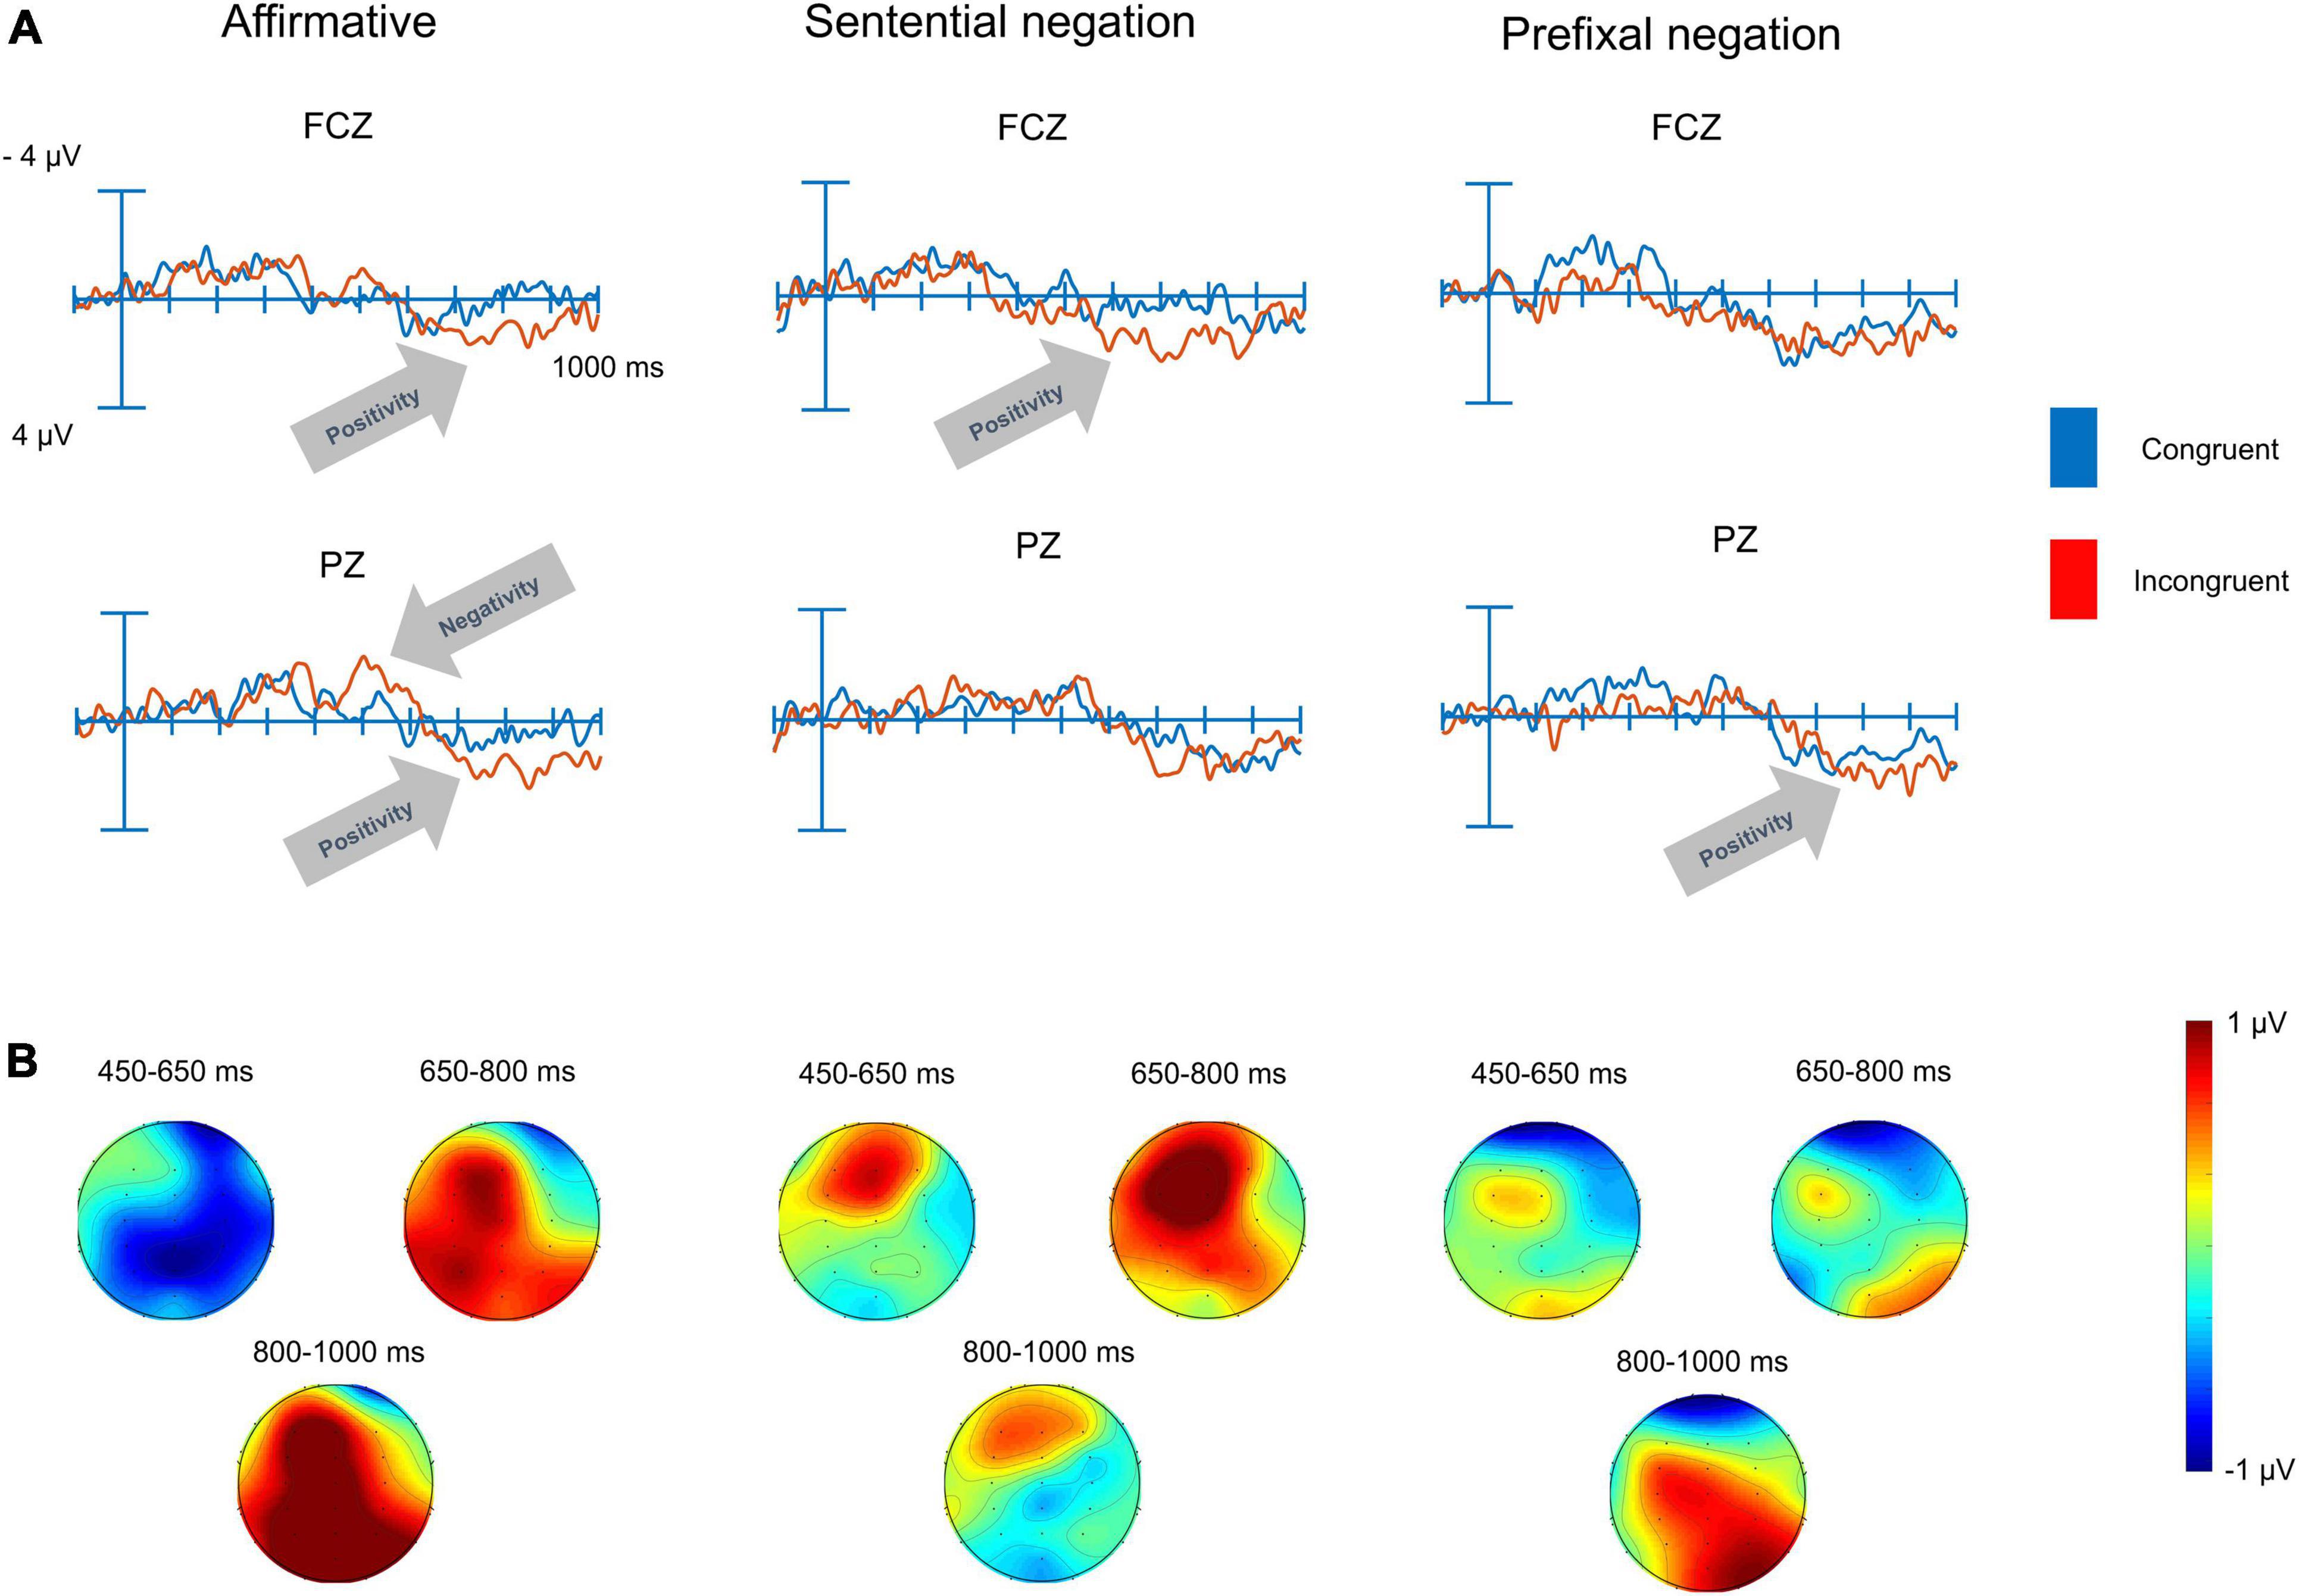 Brain responses to negated and affirmative meanings in the auditory modality